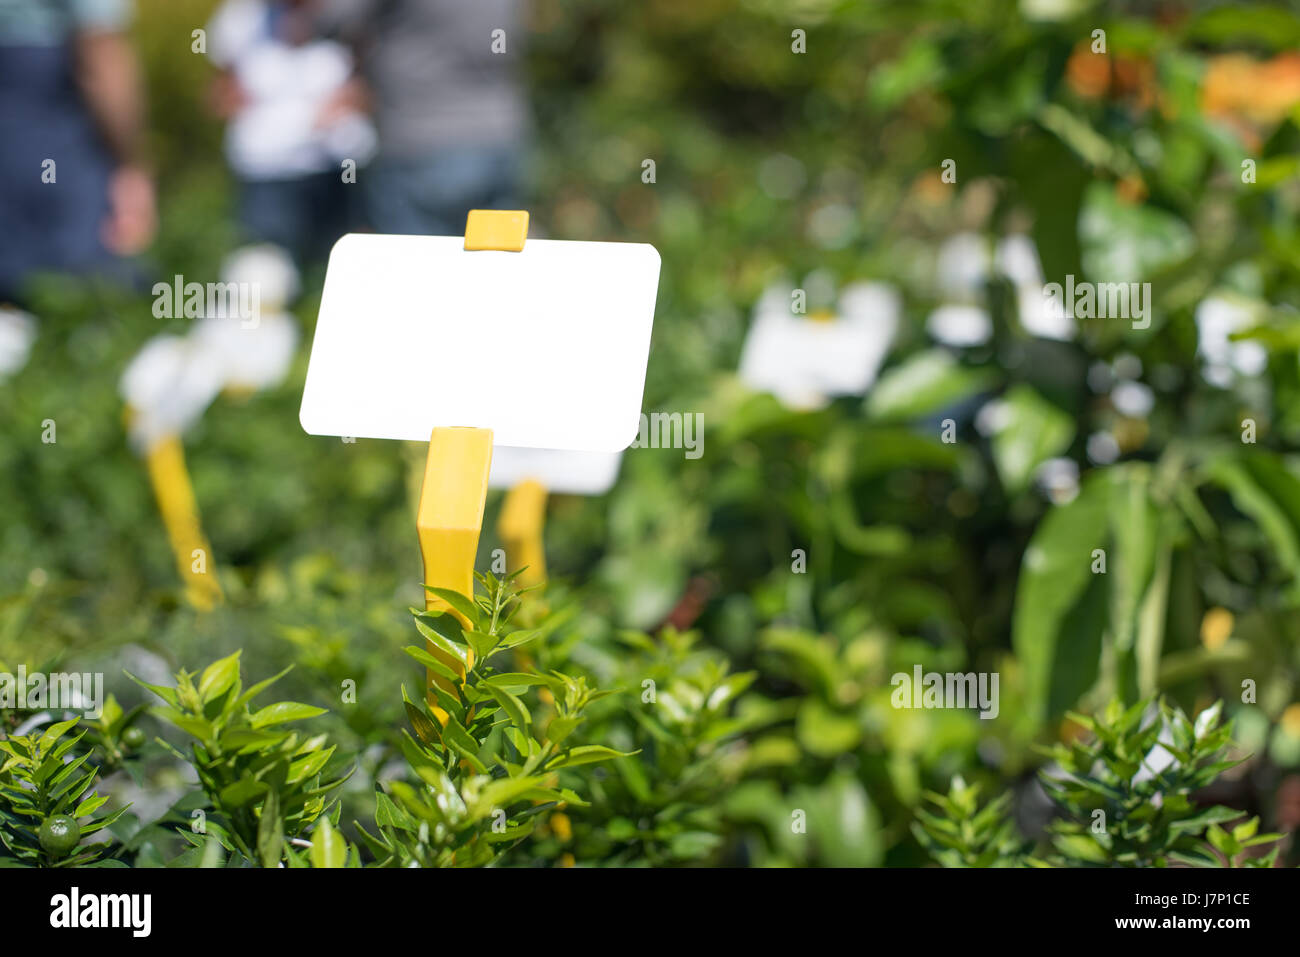 White label on green leaves, plant nursery and defocused people in background Stock Photo